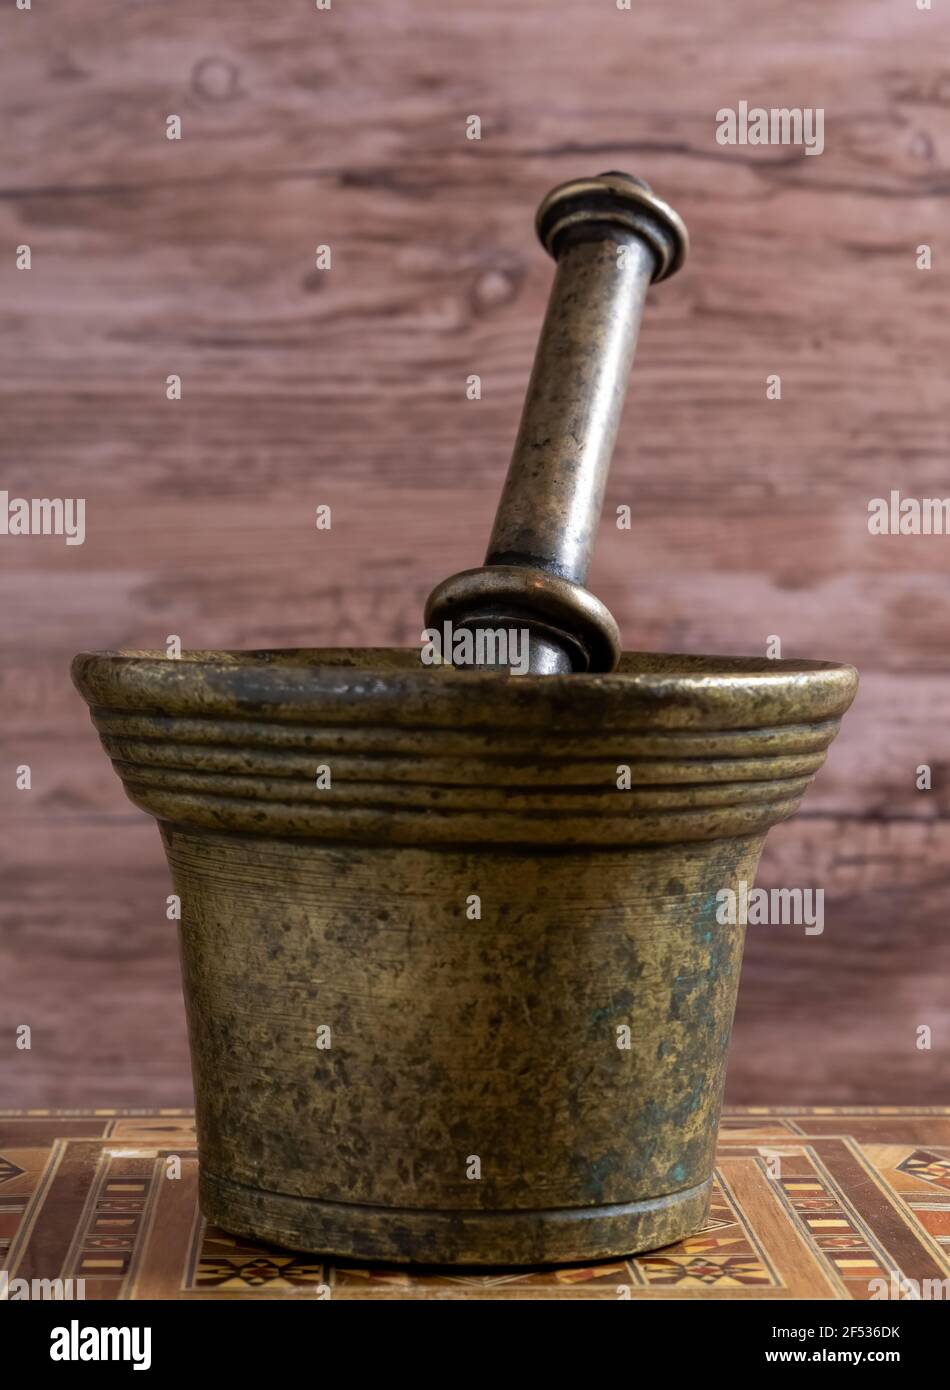 Metal Mortar for pounding weeds in pharmaceutical labors. Stock Photo